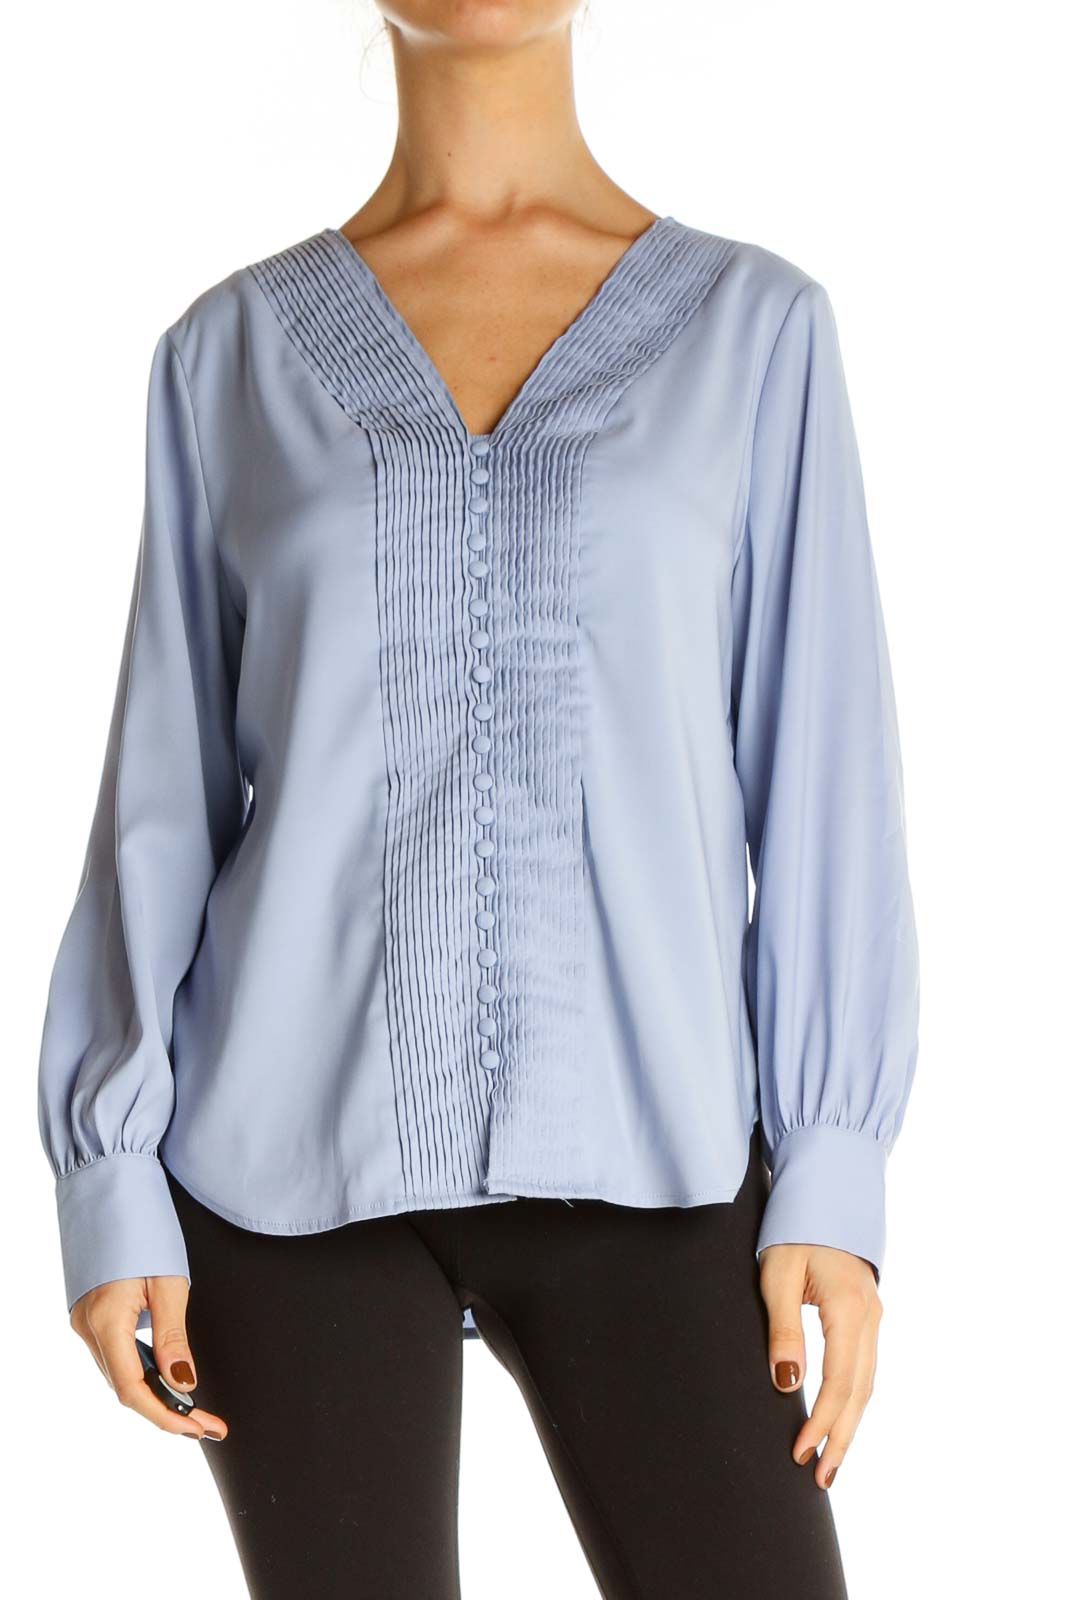 Blue Solid Formal Blouse Front